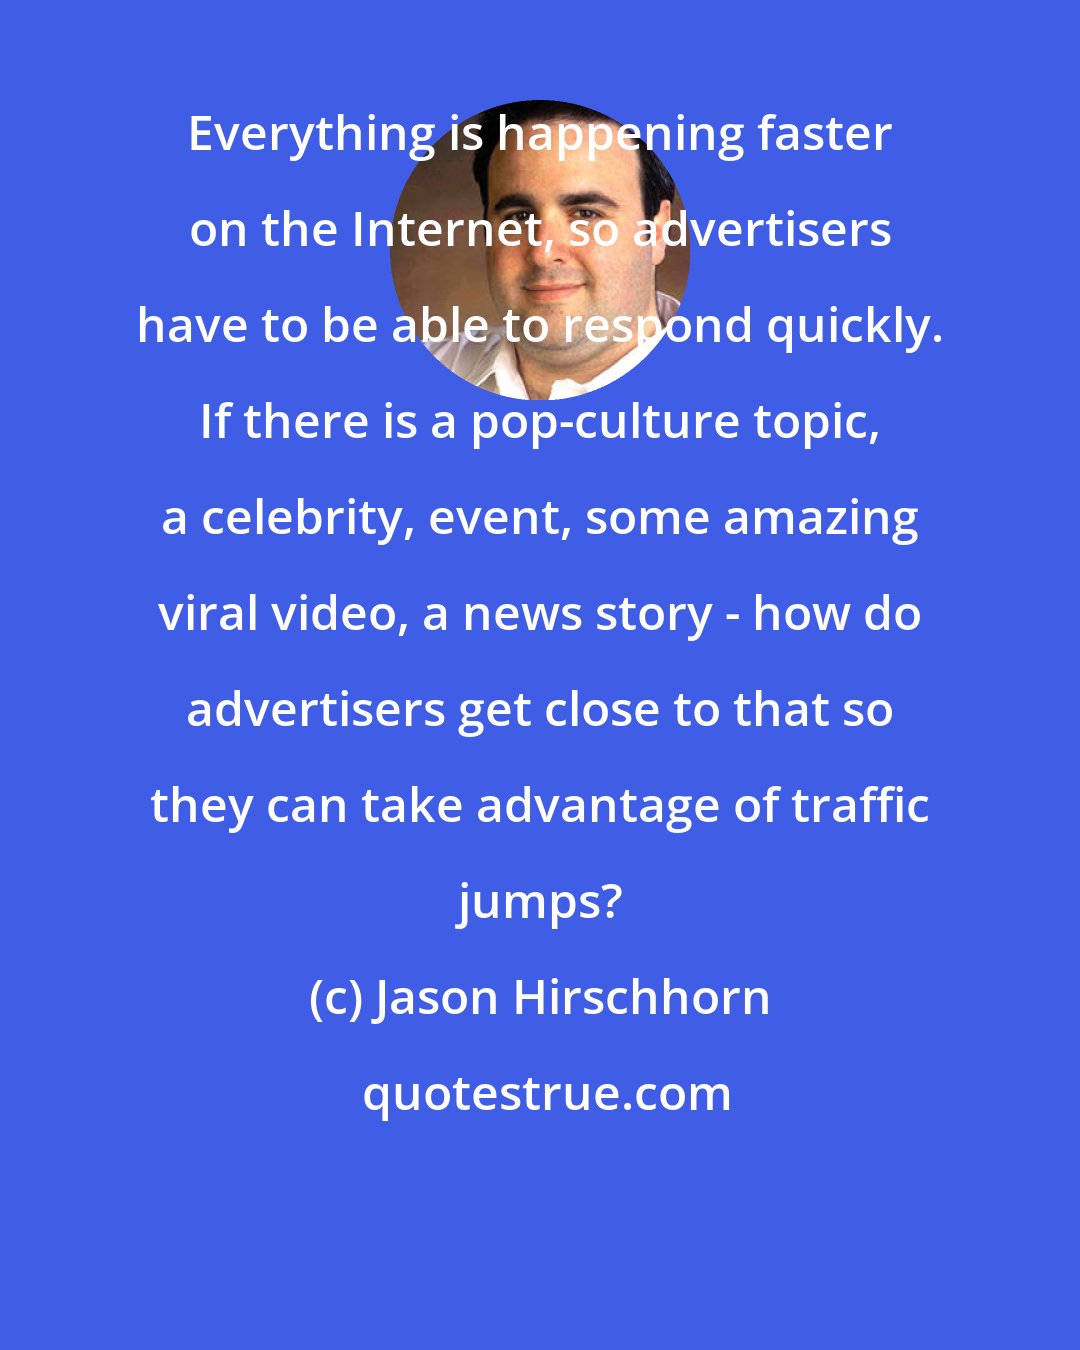 Jason Hirschhorn: Everything is happening faster on the Internet, so advertisers have to be able to respond quickly. If there is a pop-culture topic, a celebrity, event, some amazing viral video, a news story - how do advertisers get close to that so they can take advantage of traffic jumps?